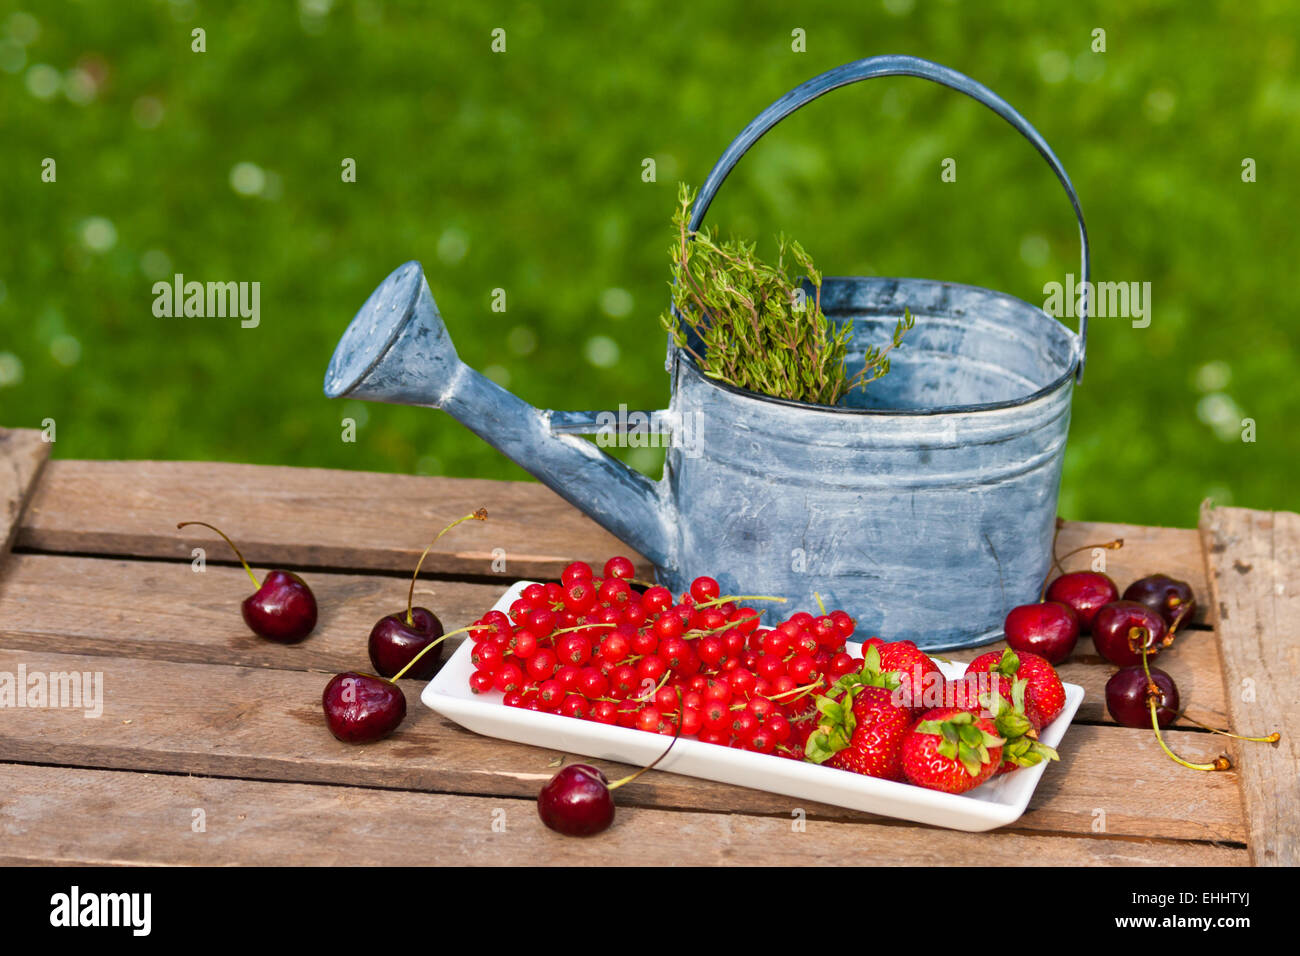 Fruits with watering can Stock Photo